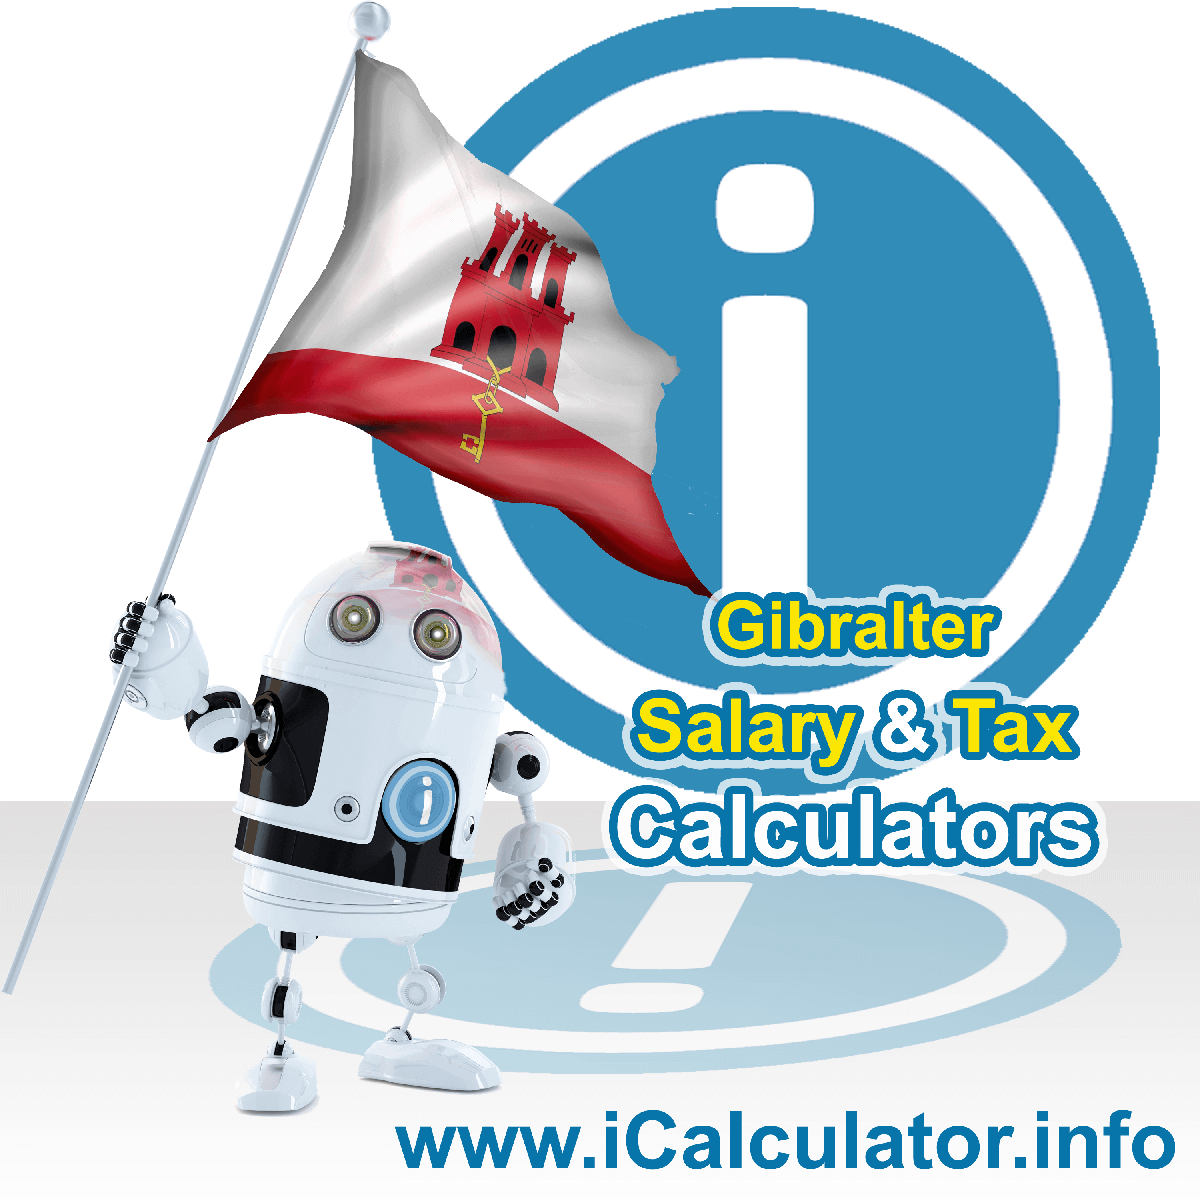 Gibraltar Wage Calculator. This image shows the Gibraltar flag and information relating to the tax formula for the Gibraltar Tax Calculator